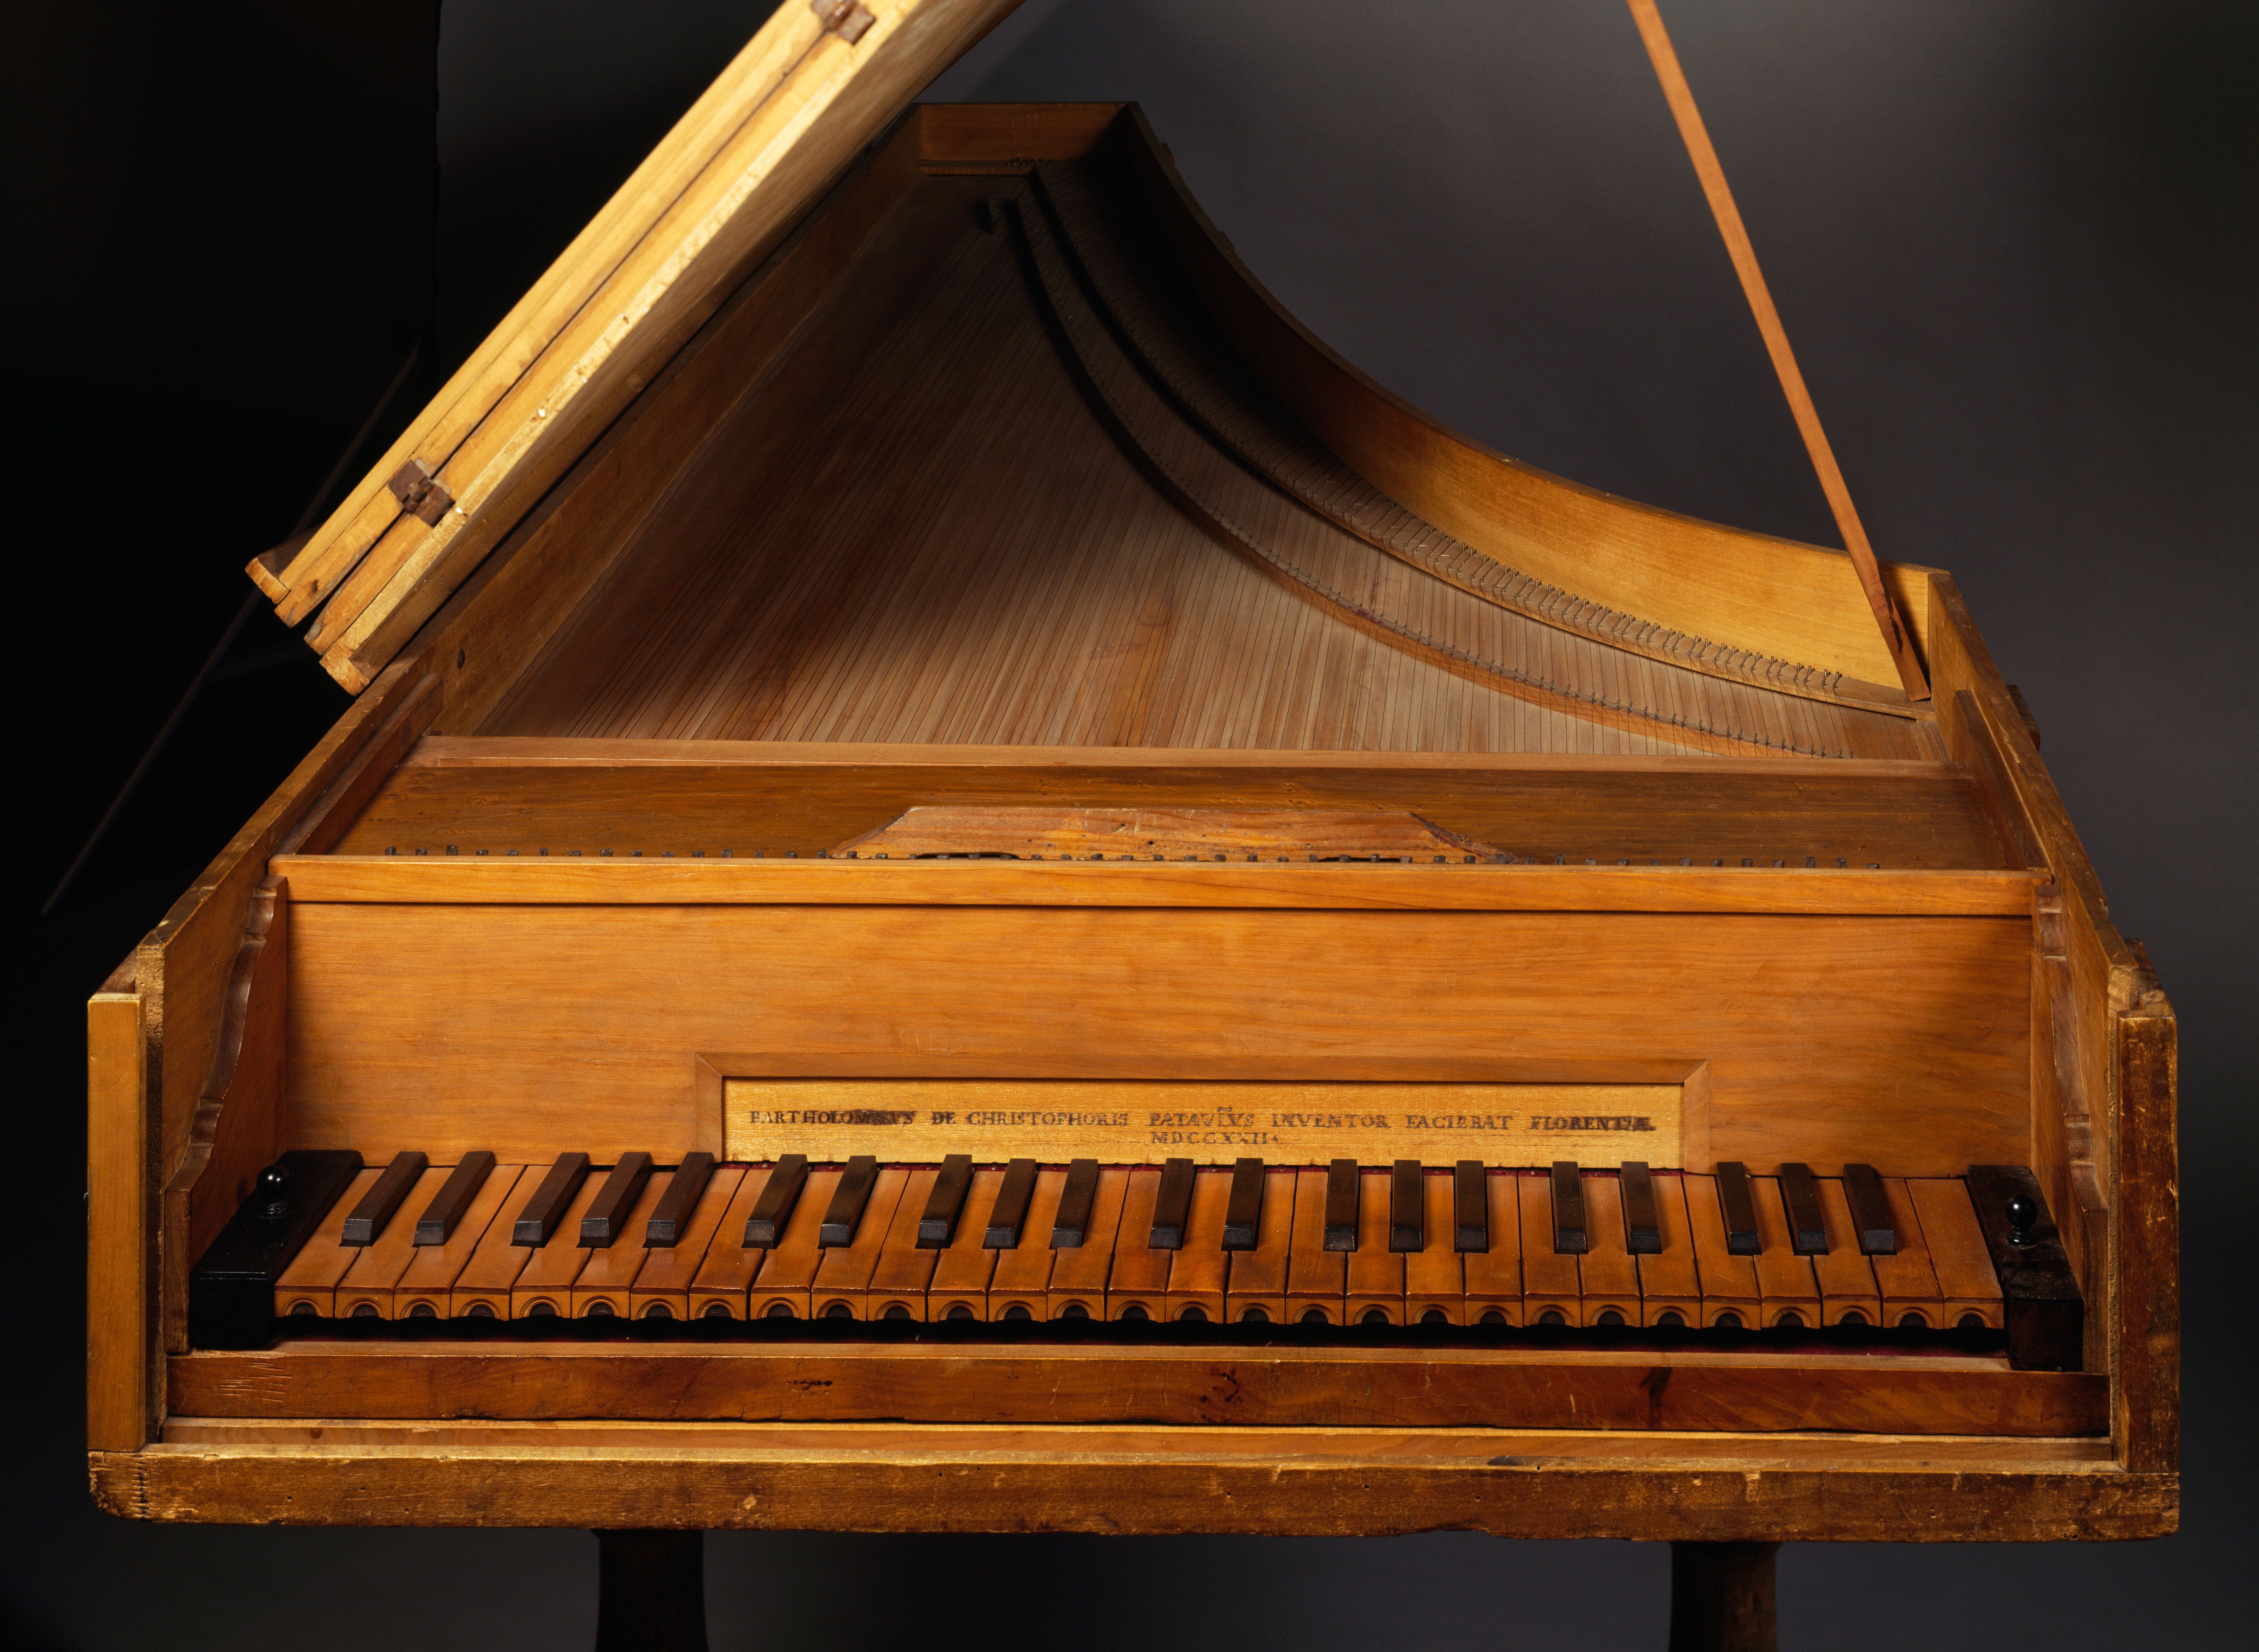 clon herida Rebajar Purchasing a Piano: A First-Time Buyers Guide | The Strategist